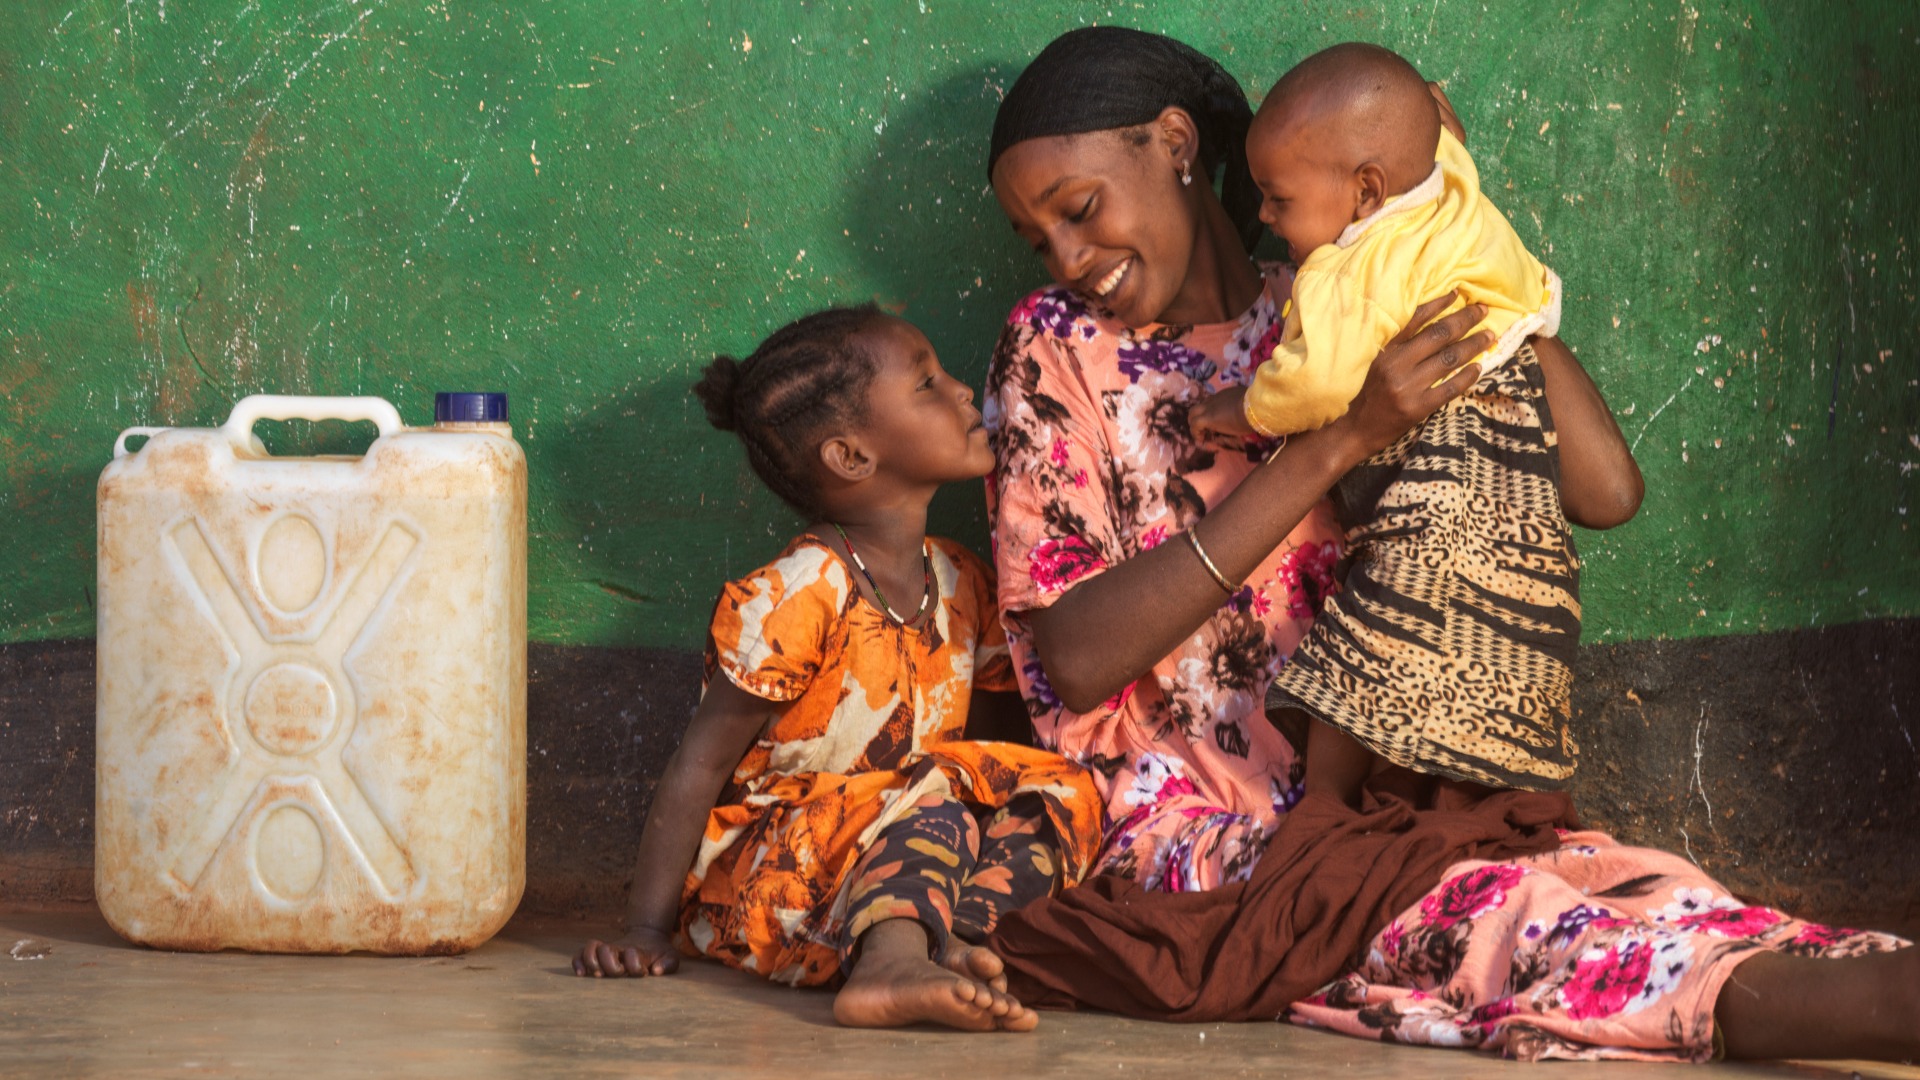 Darmi, 23, with daughters Lelo, 4, and Nadi, 1, at home in Moyale.